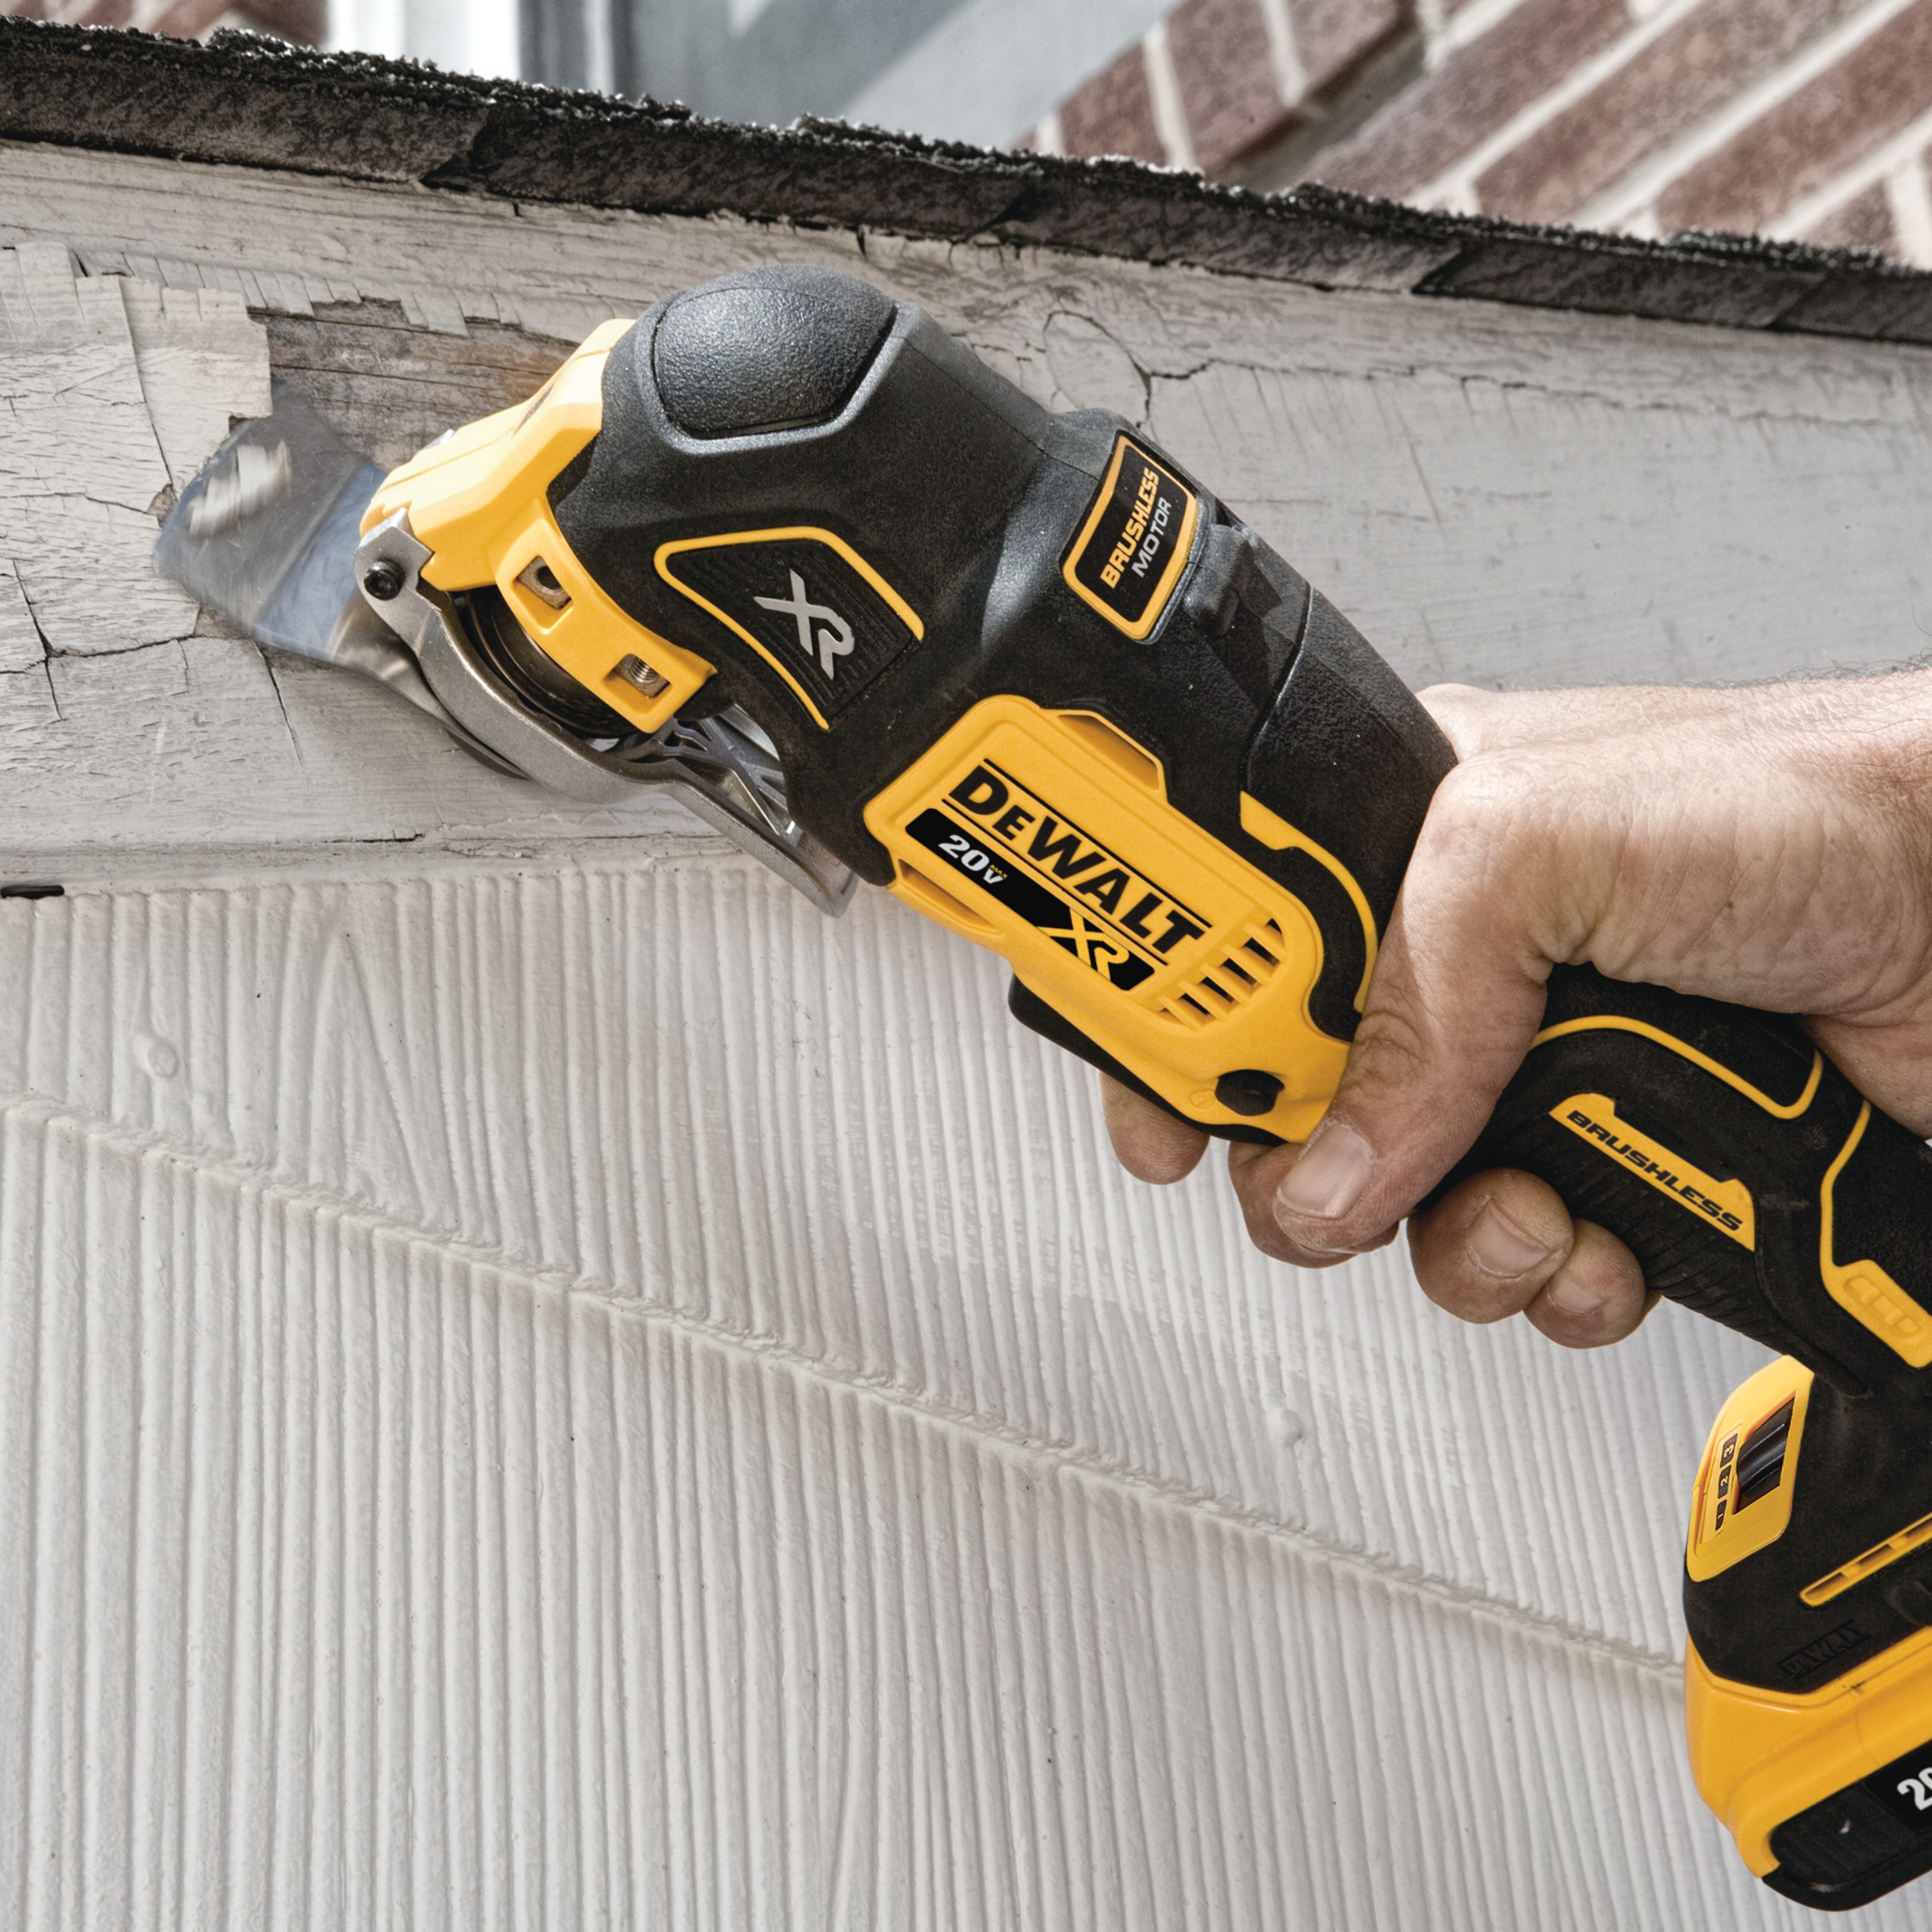 XR Cordless Oscillating Multi Tool being used by person to remove blistered paint from a wall